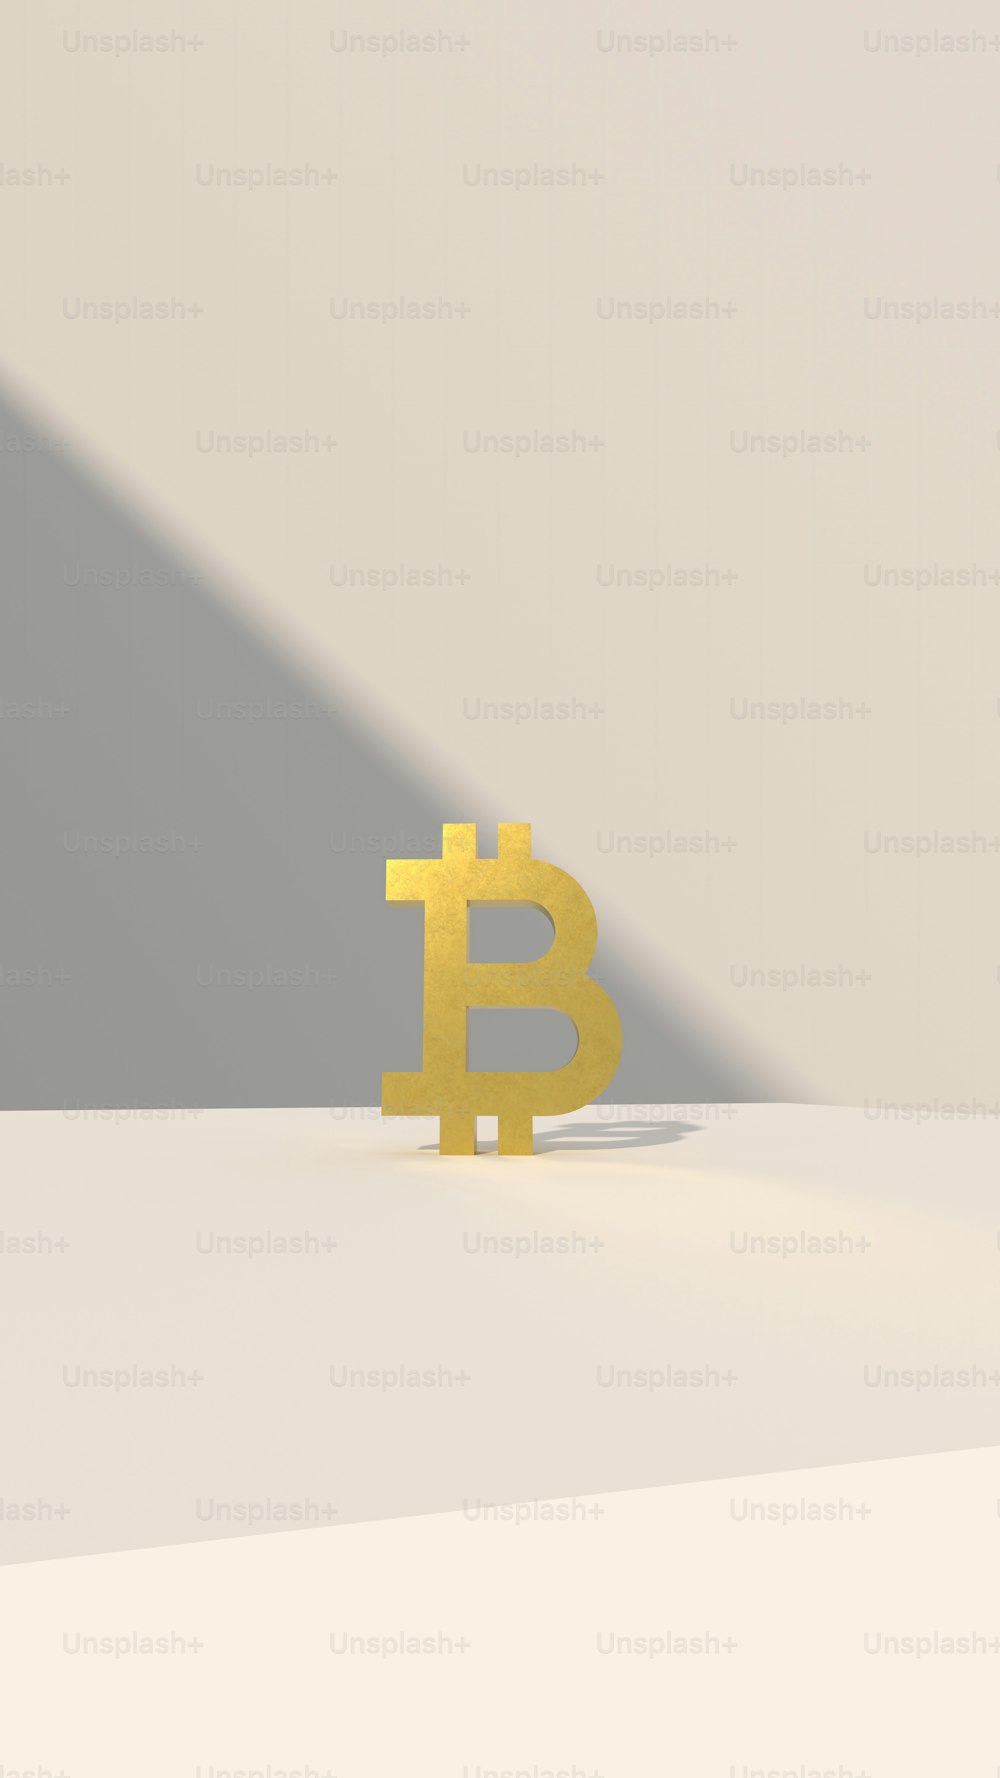 a yellow bit coin sitting on top of a table